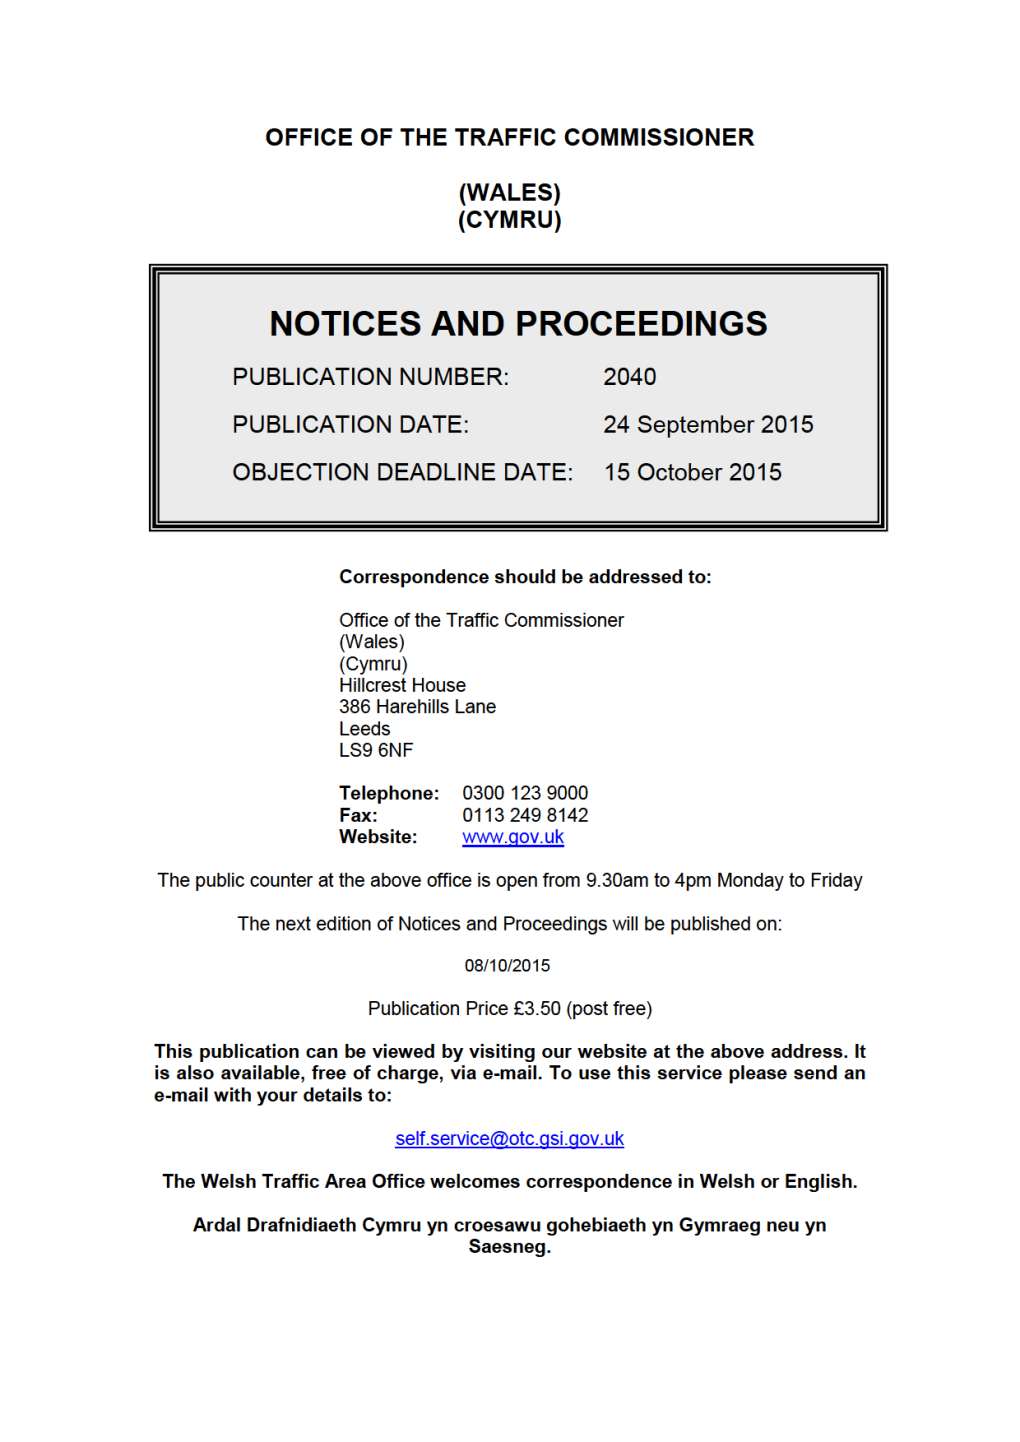 NOTICES and PROCEEDINGS 24 September 2015